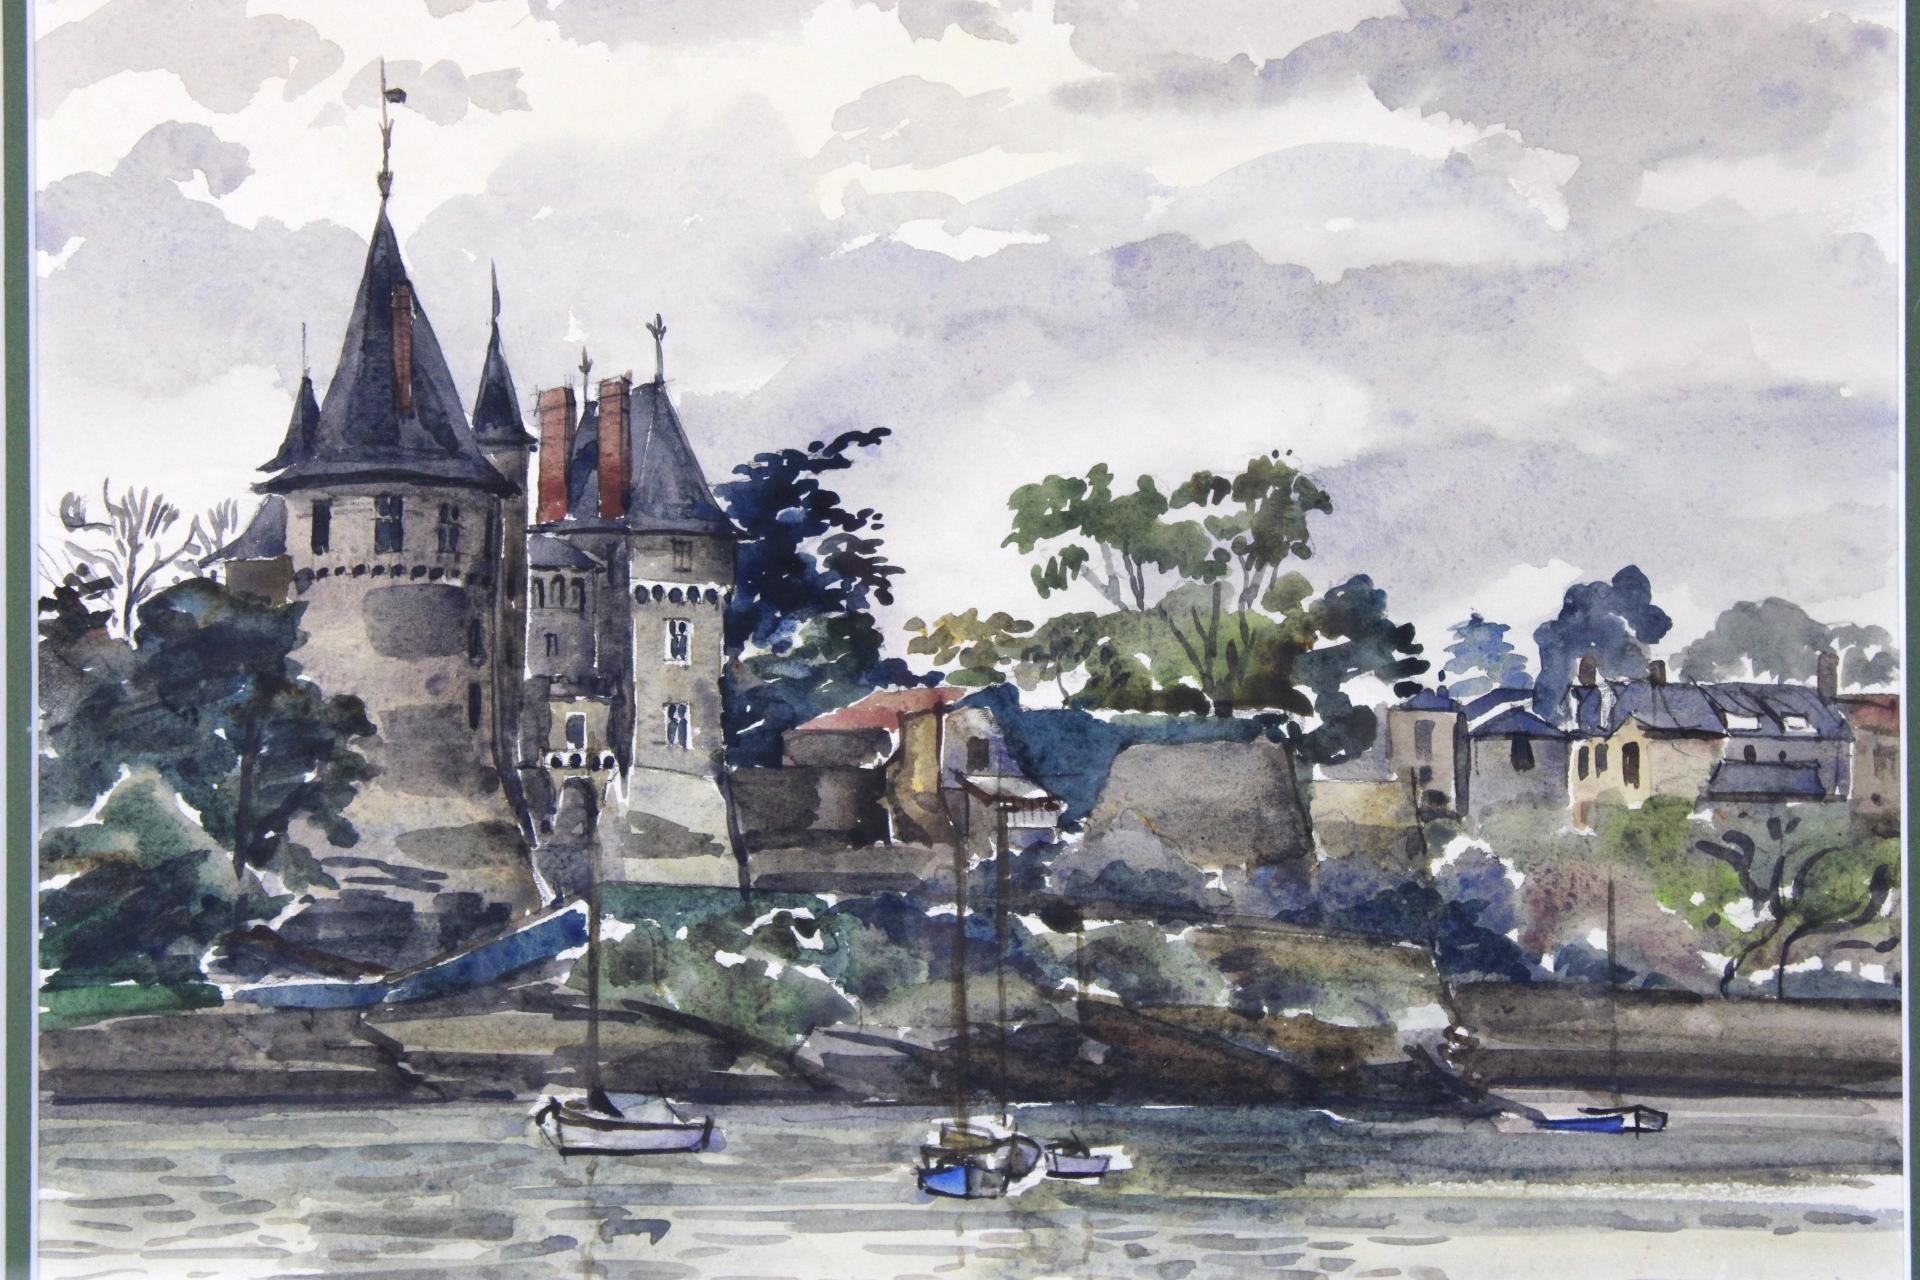 *Dimensions include the frame 

This French watercolor from around 1940 captures a picturesque view reminiscent of the Impressionist penchant for natural light and landscape scenes. The painting features a castle by the water, a subject that harks